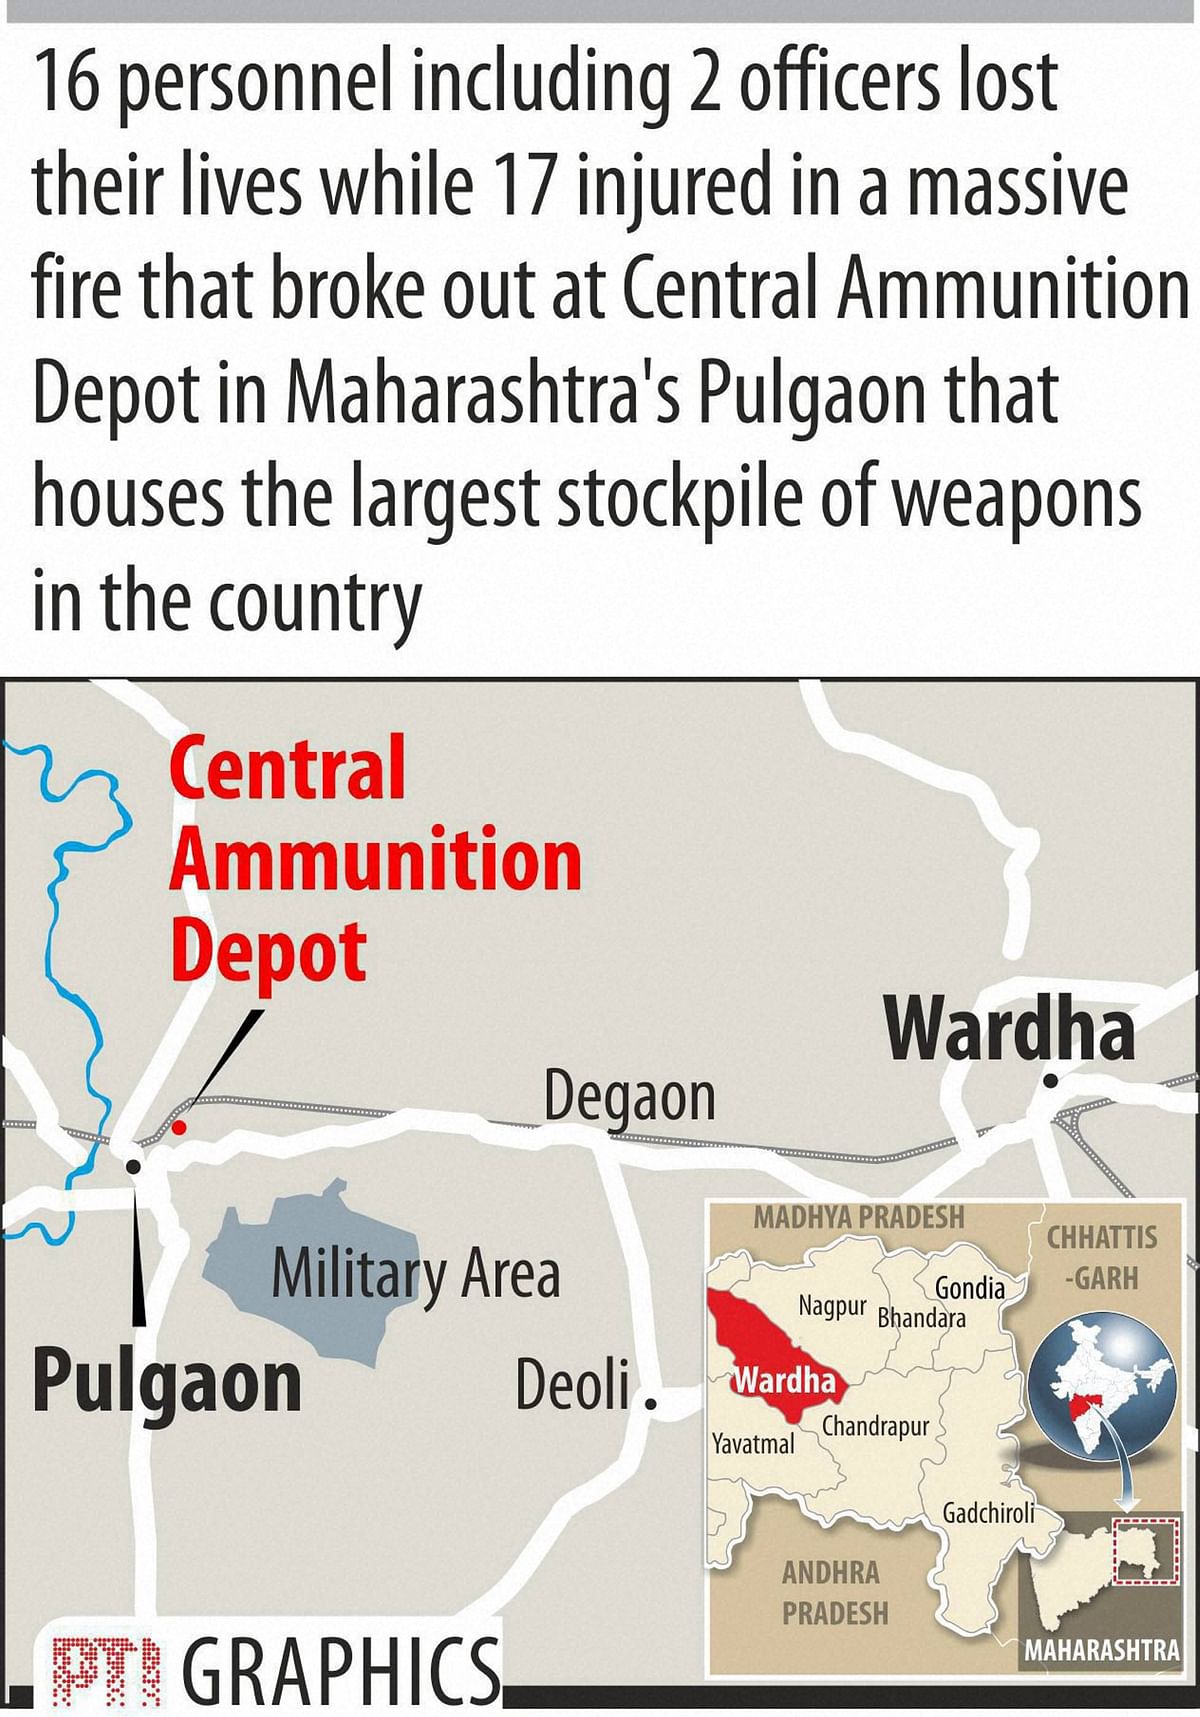 Fire at India’s largest military ammunition depot in Pulgaon in Maharashtra killed two officers, among 20 others.